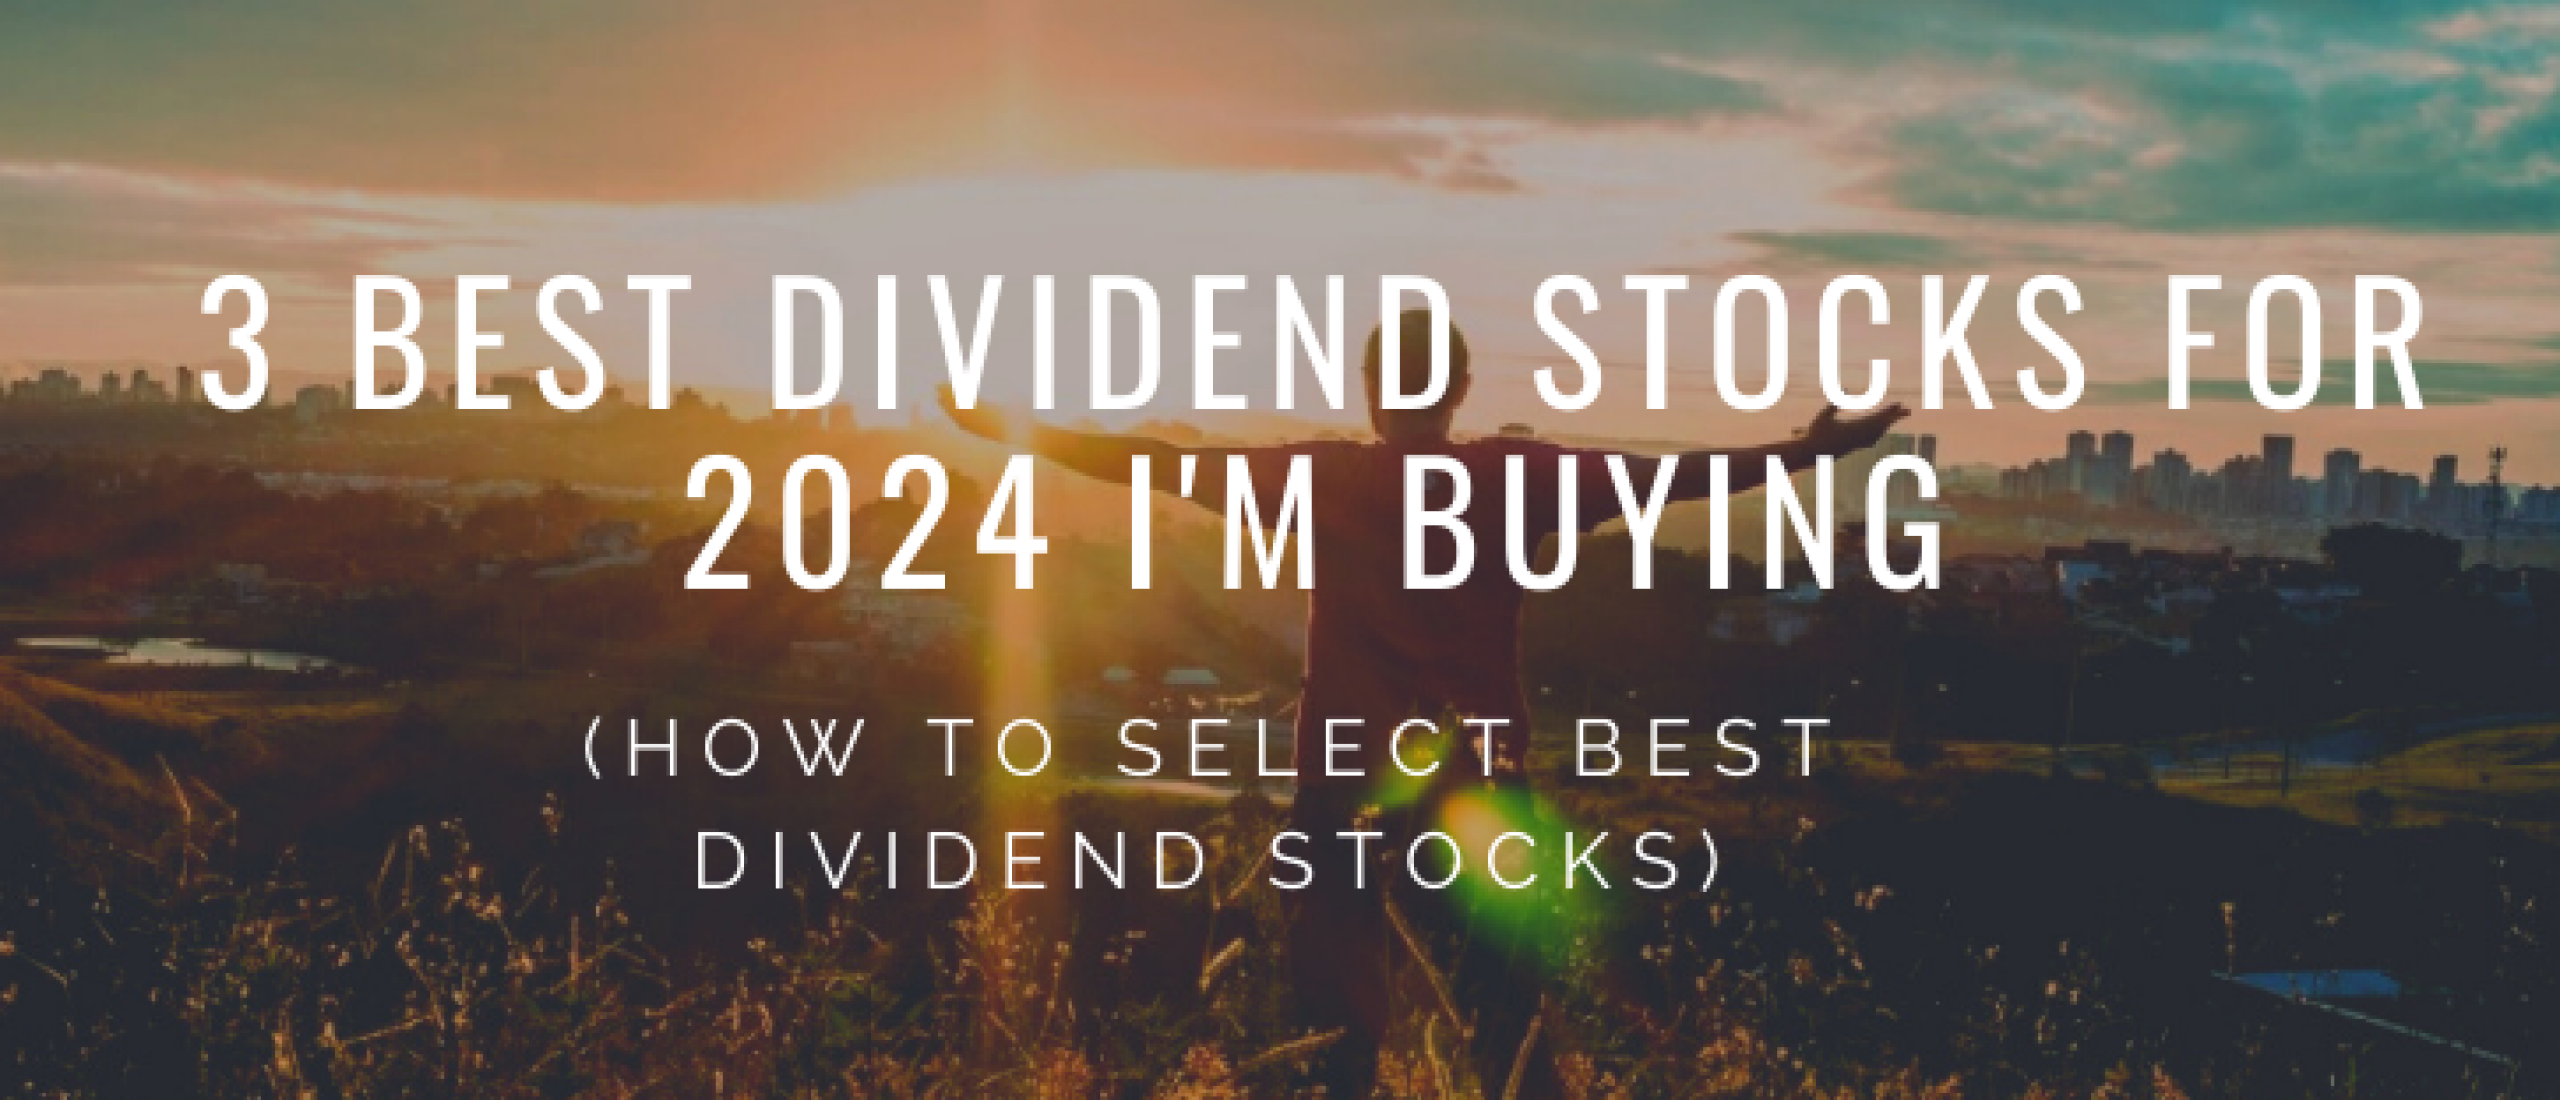 My 2024 Financial Resolution: Buying More of These 3 Stocks